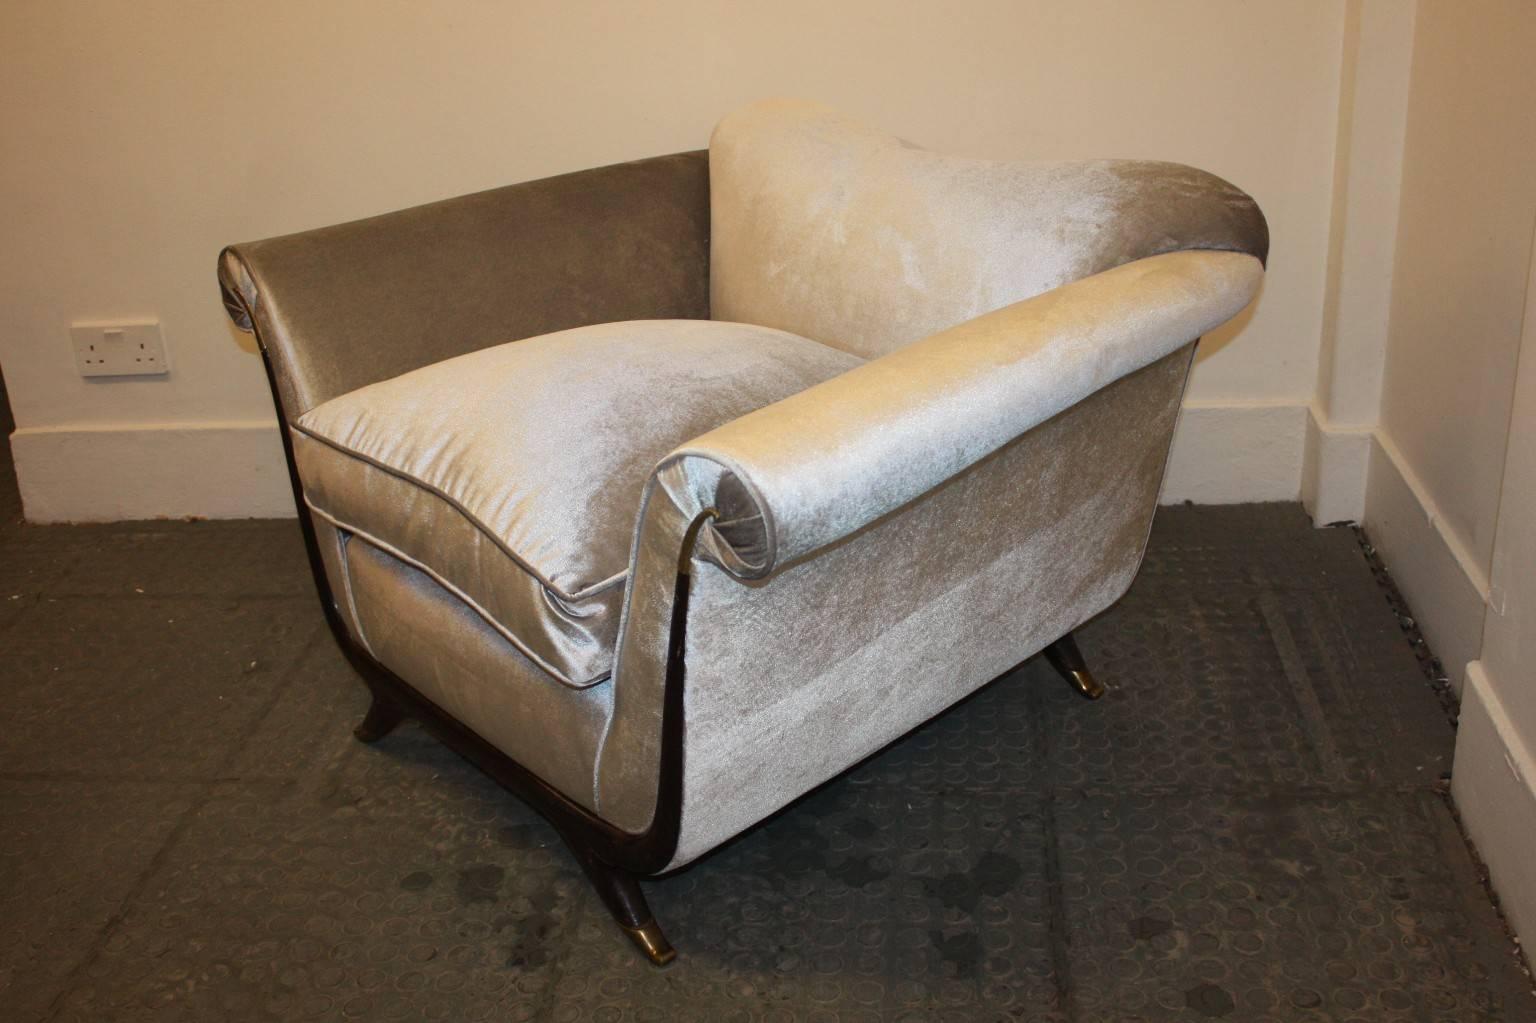 A pair of stunning armchairs with new upholstery in gray velvet, with brass sabot on the feet and decorative brass finish on the arms. Designed by G. Ulrich, Italian, 1940s.